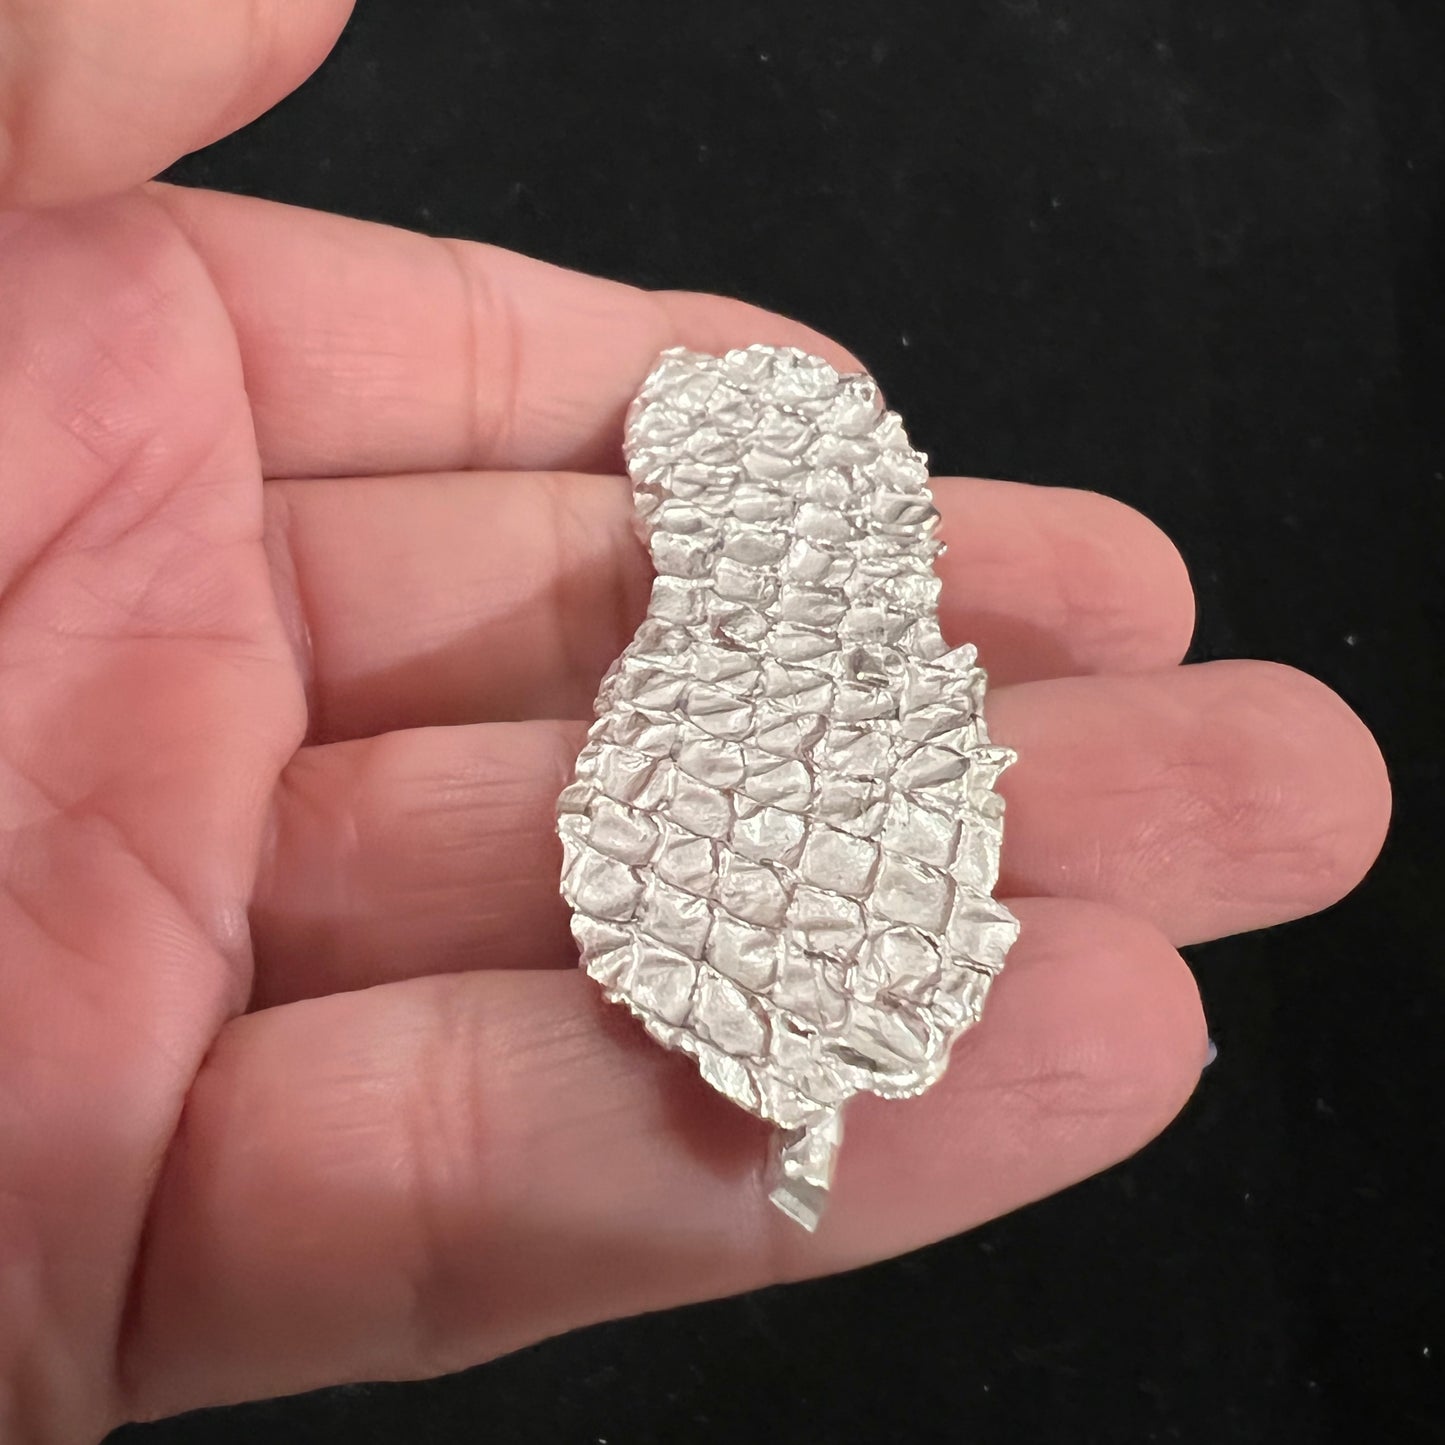 Snakeskin cast in Sterling Silver for Jewelry Design